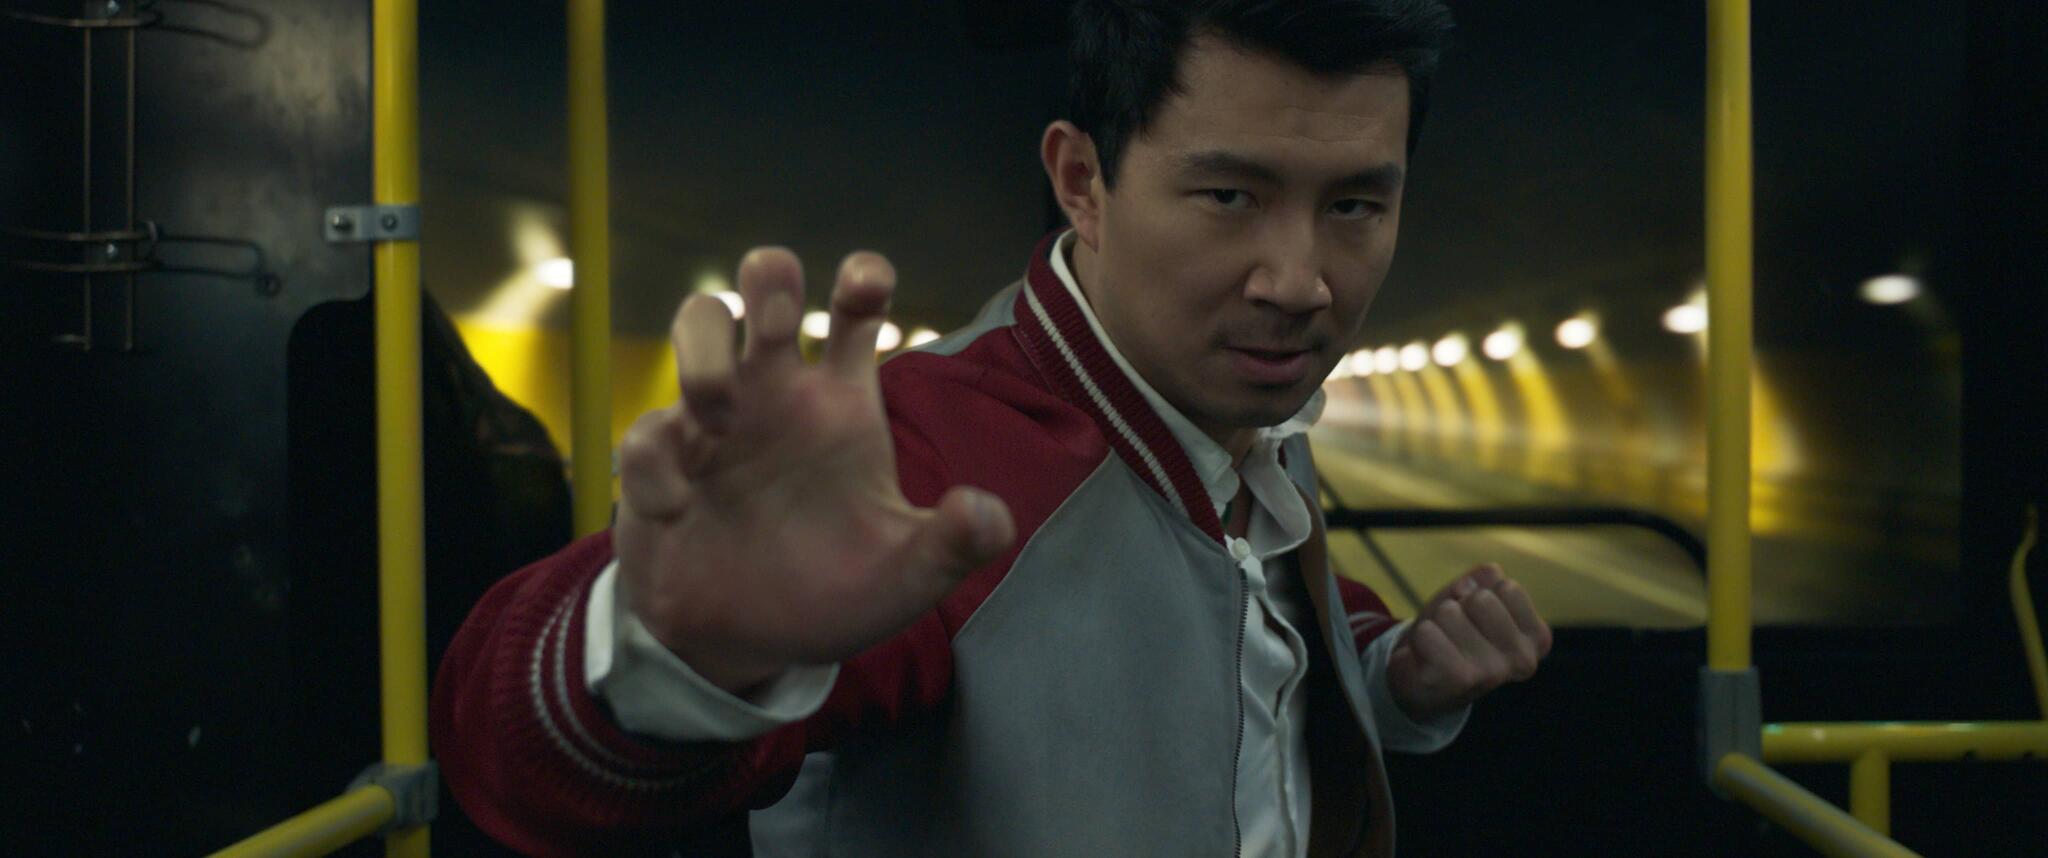 Shang-Chi and the Legend of the Ten Rings Review: MCU’s Foray Into Martial-Arts is Intermediately Spectacular